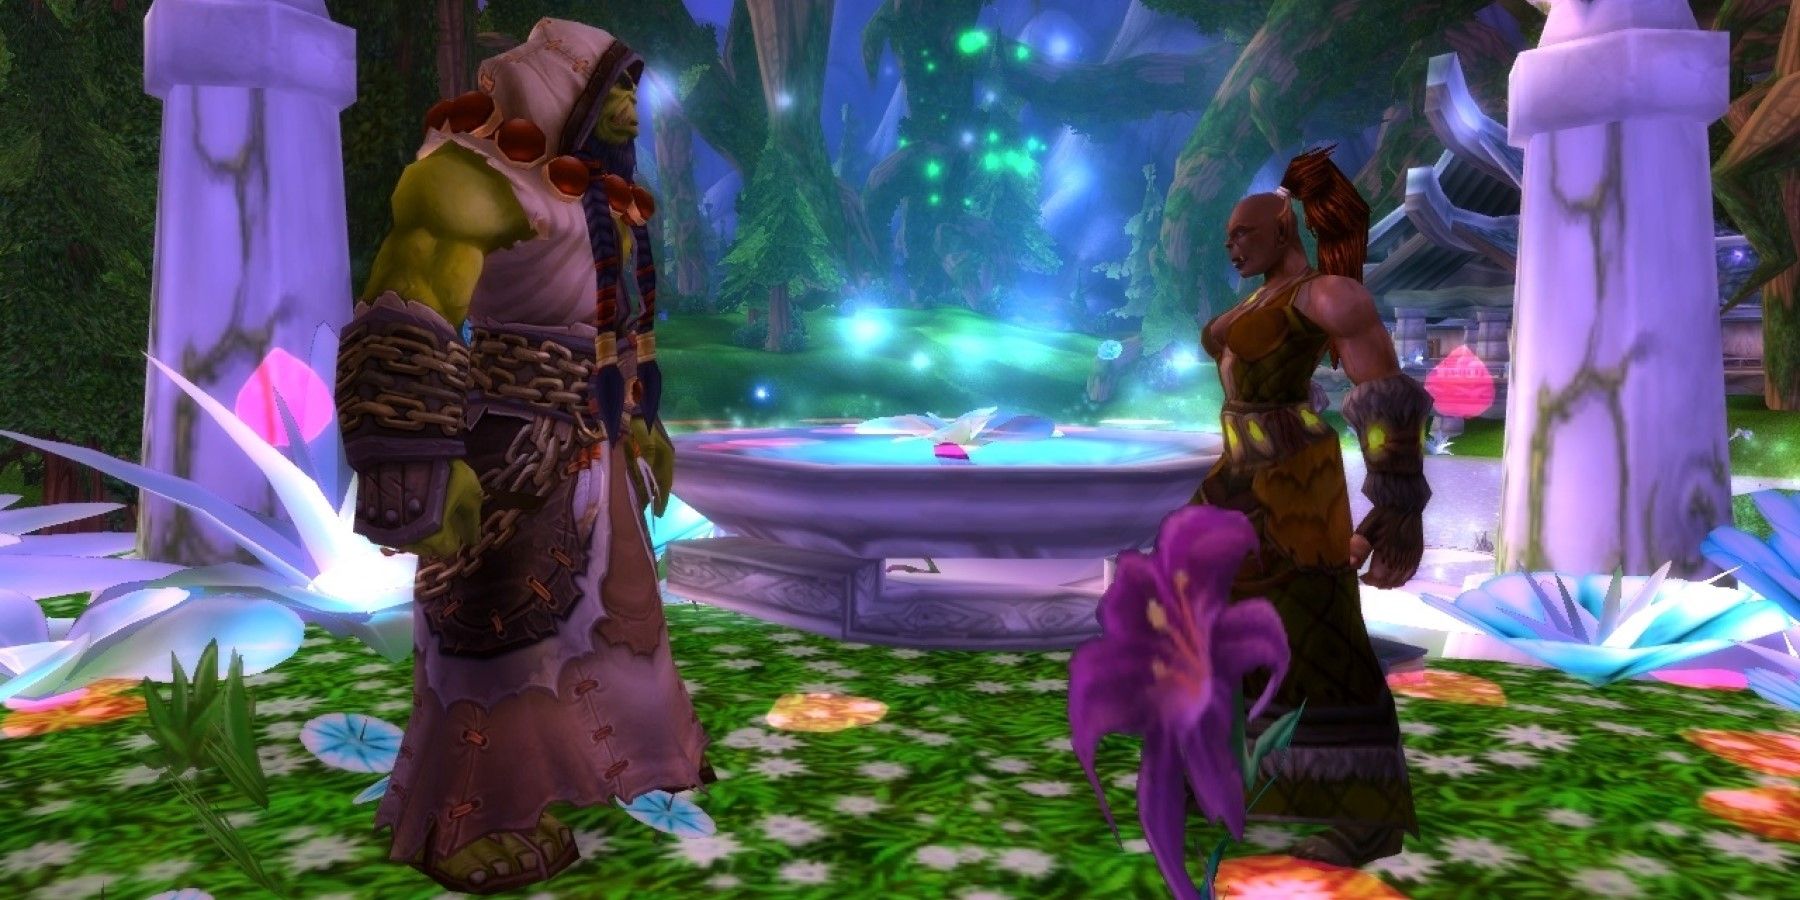 thrall and aggra's marriage from wow cataclysm